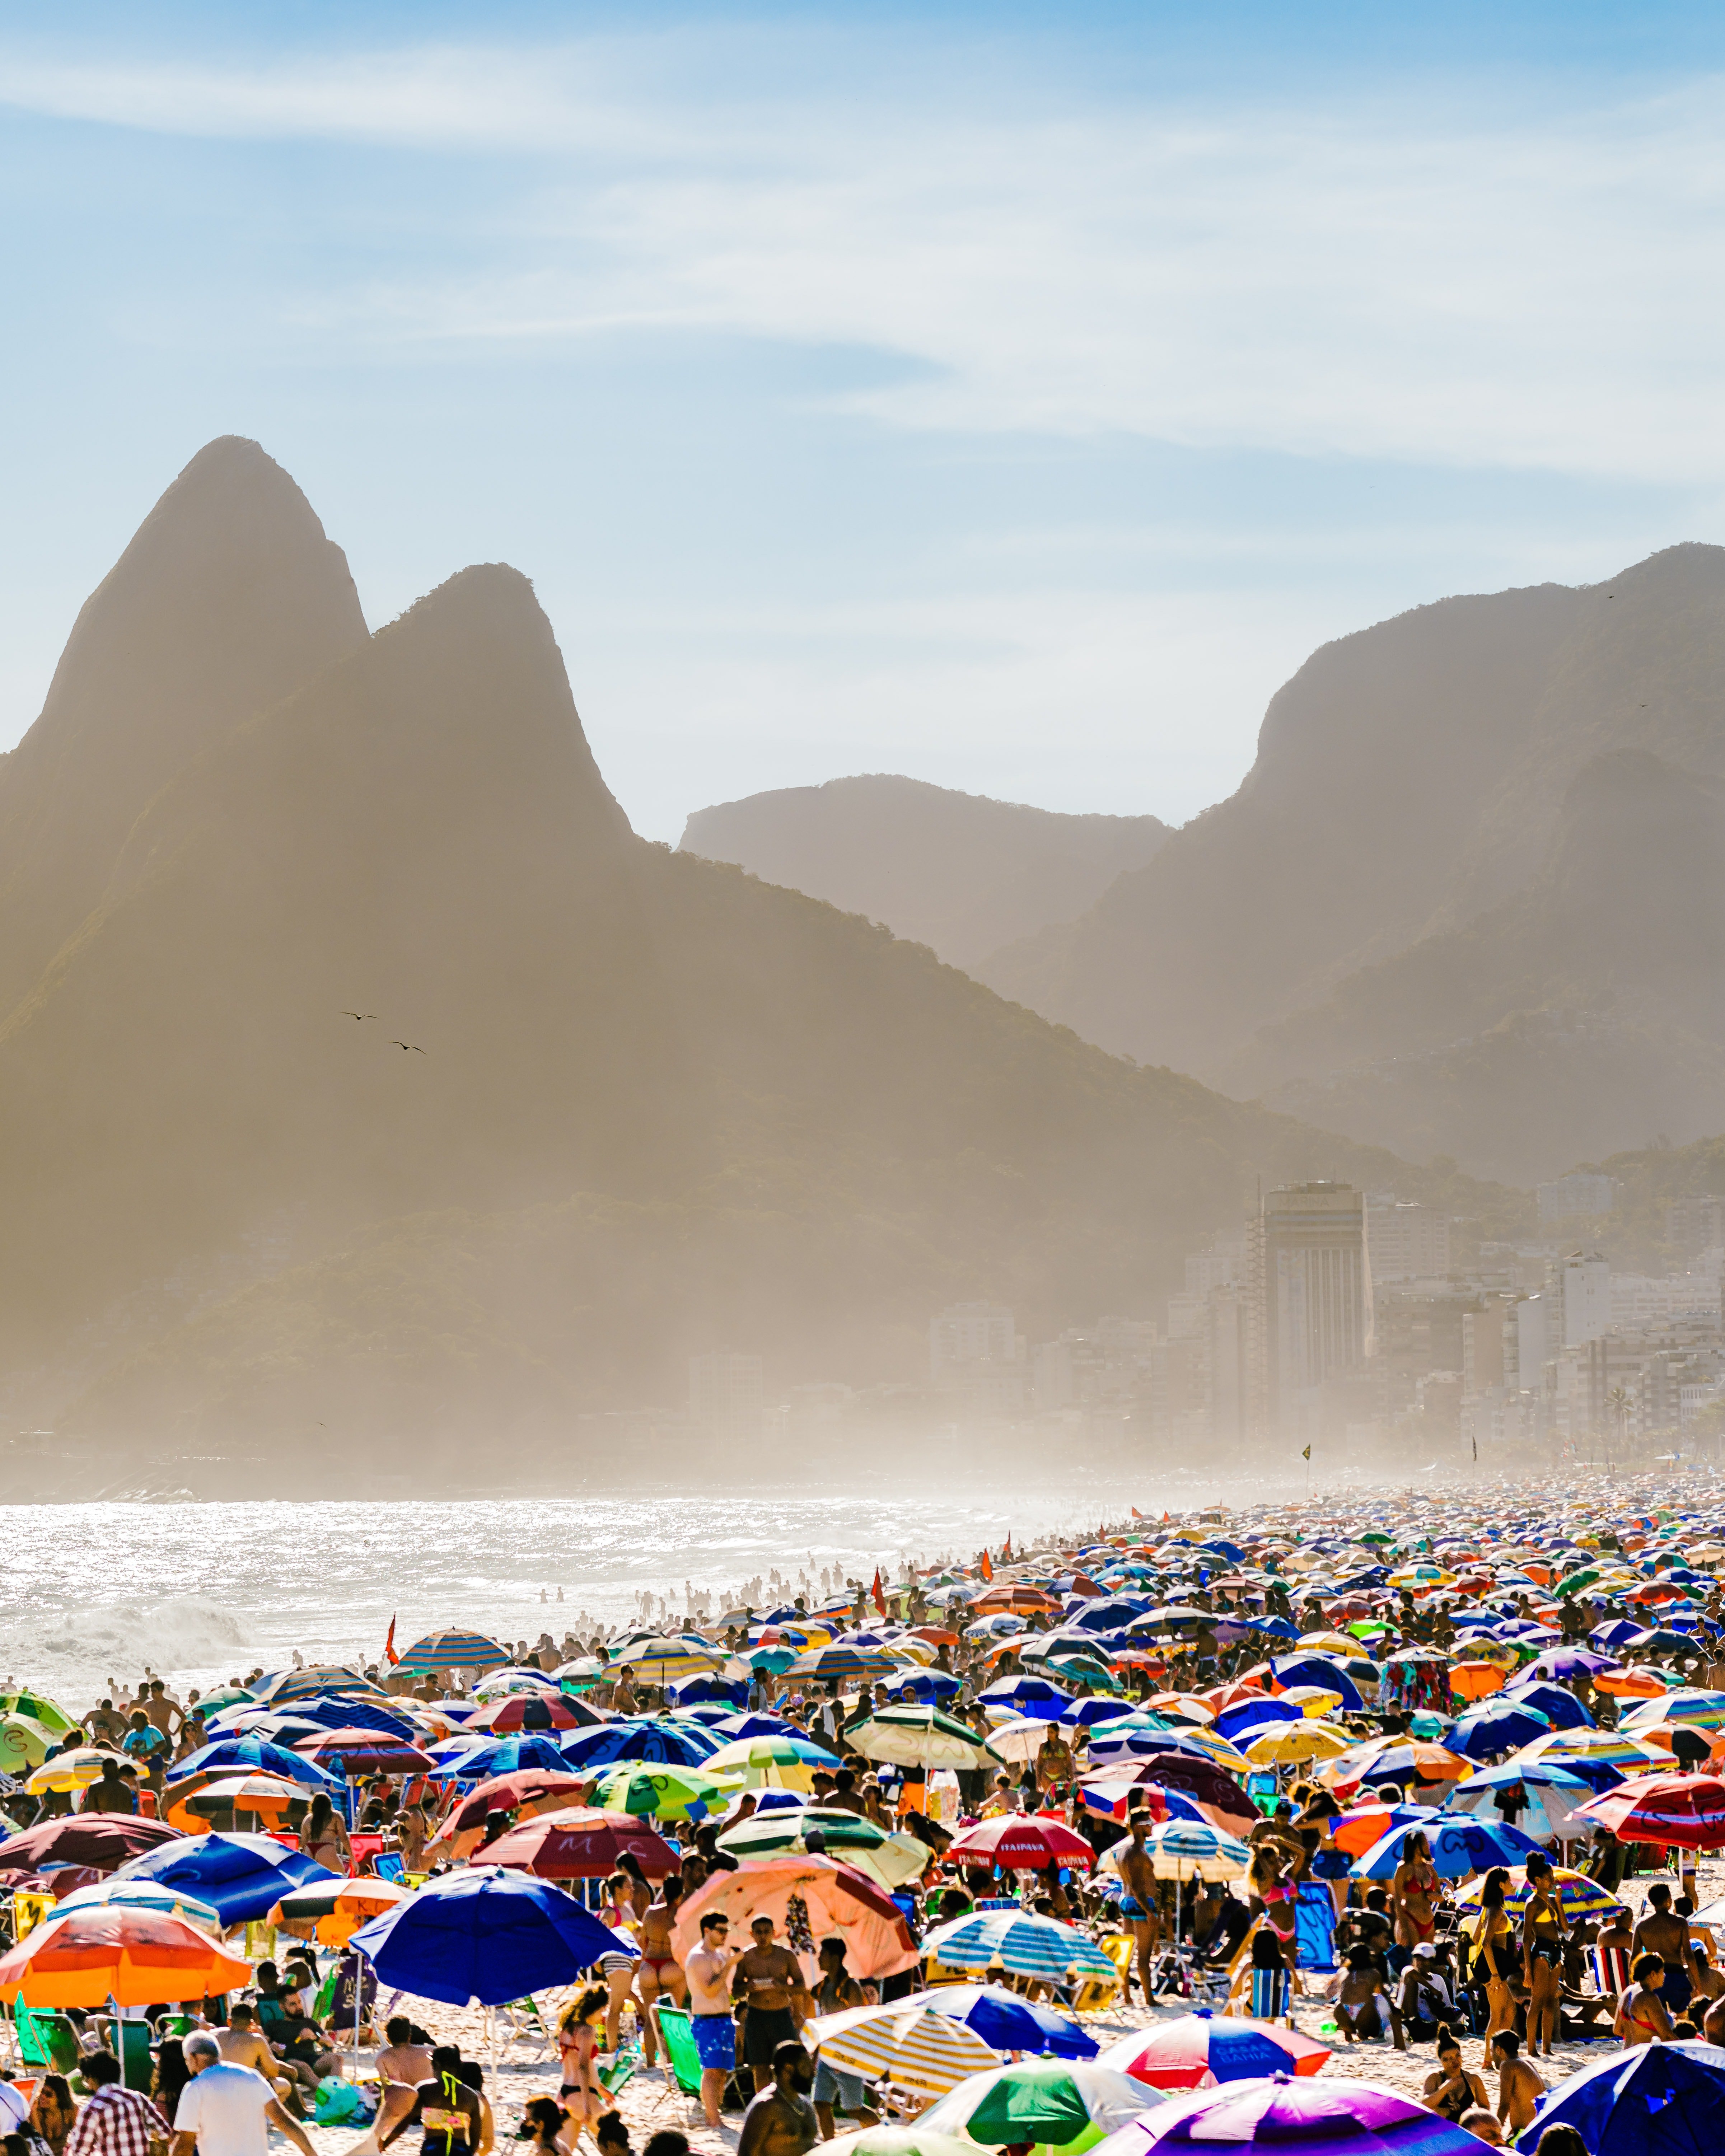 A very crowded beach view. | Source: Shutterstock 